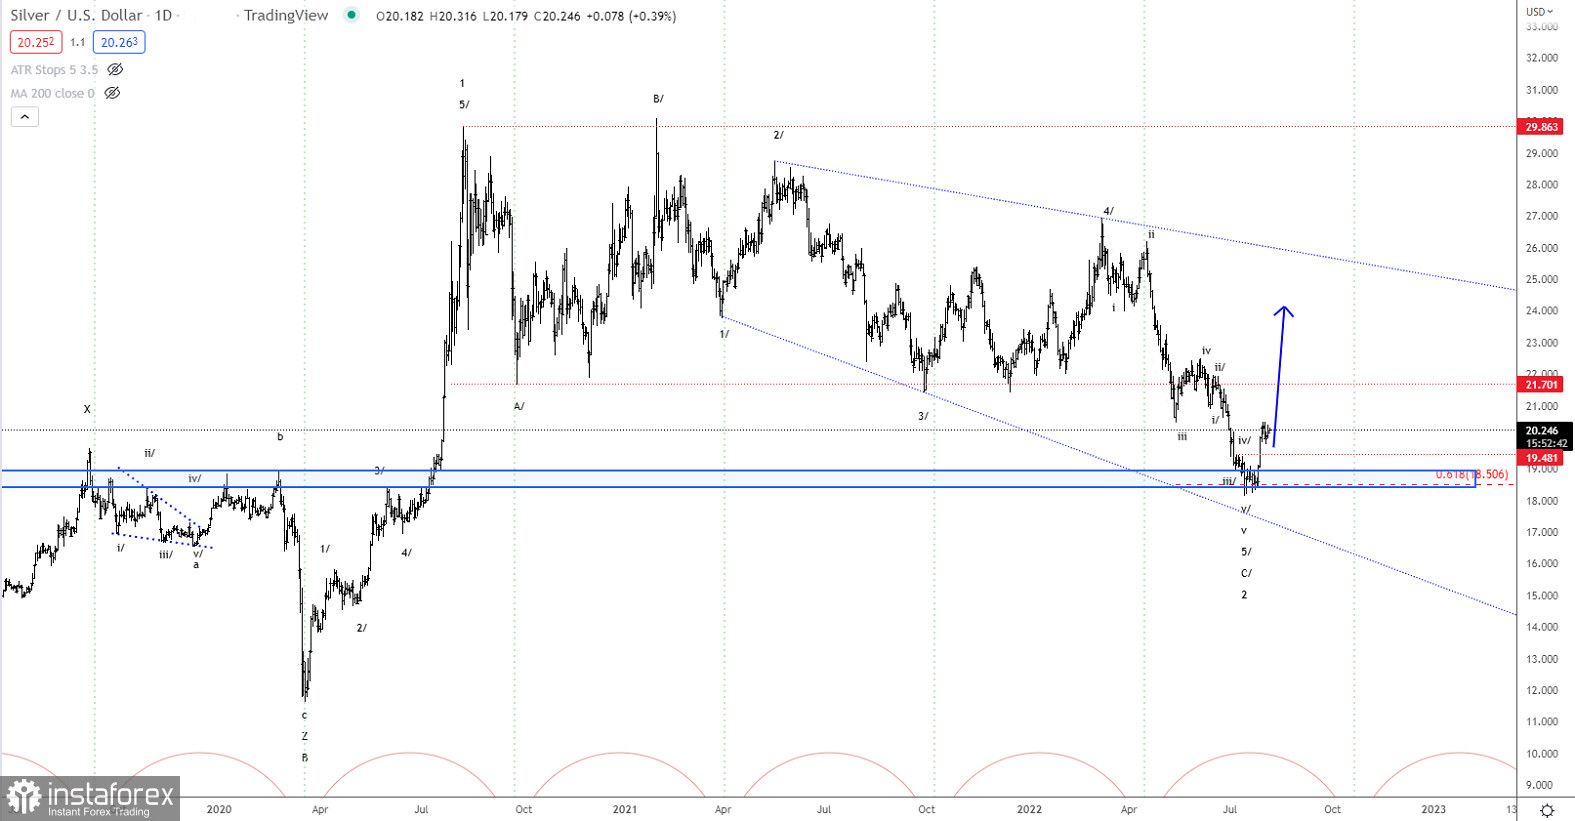 Elliott wave analysis of Silver for August 5, 2022